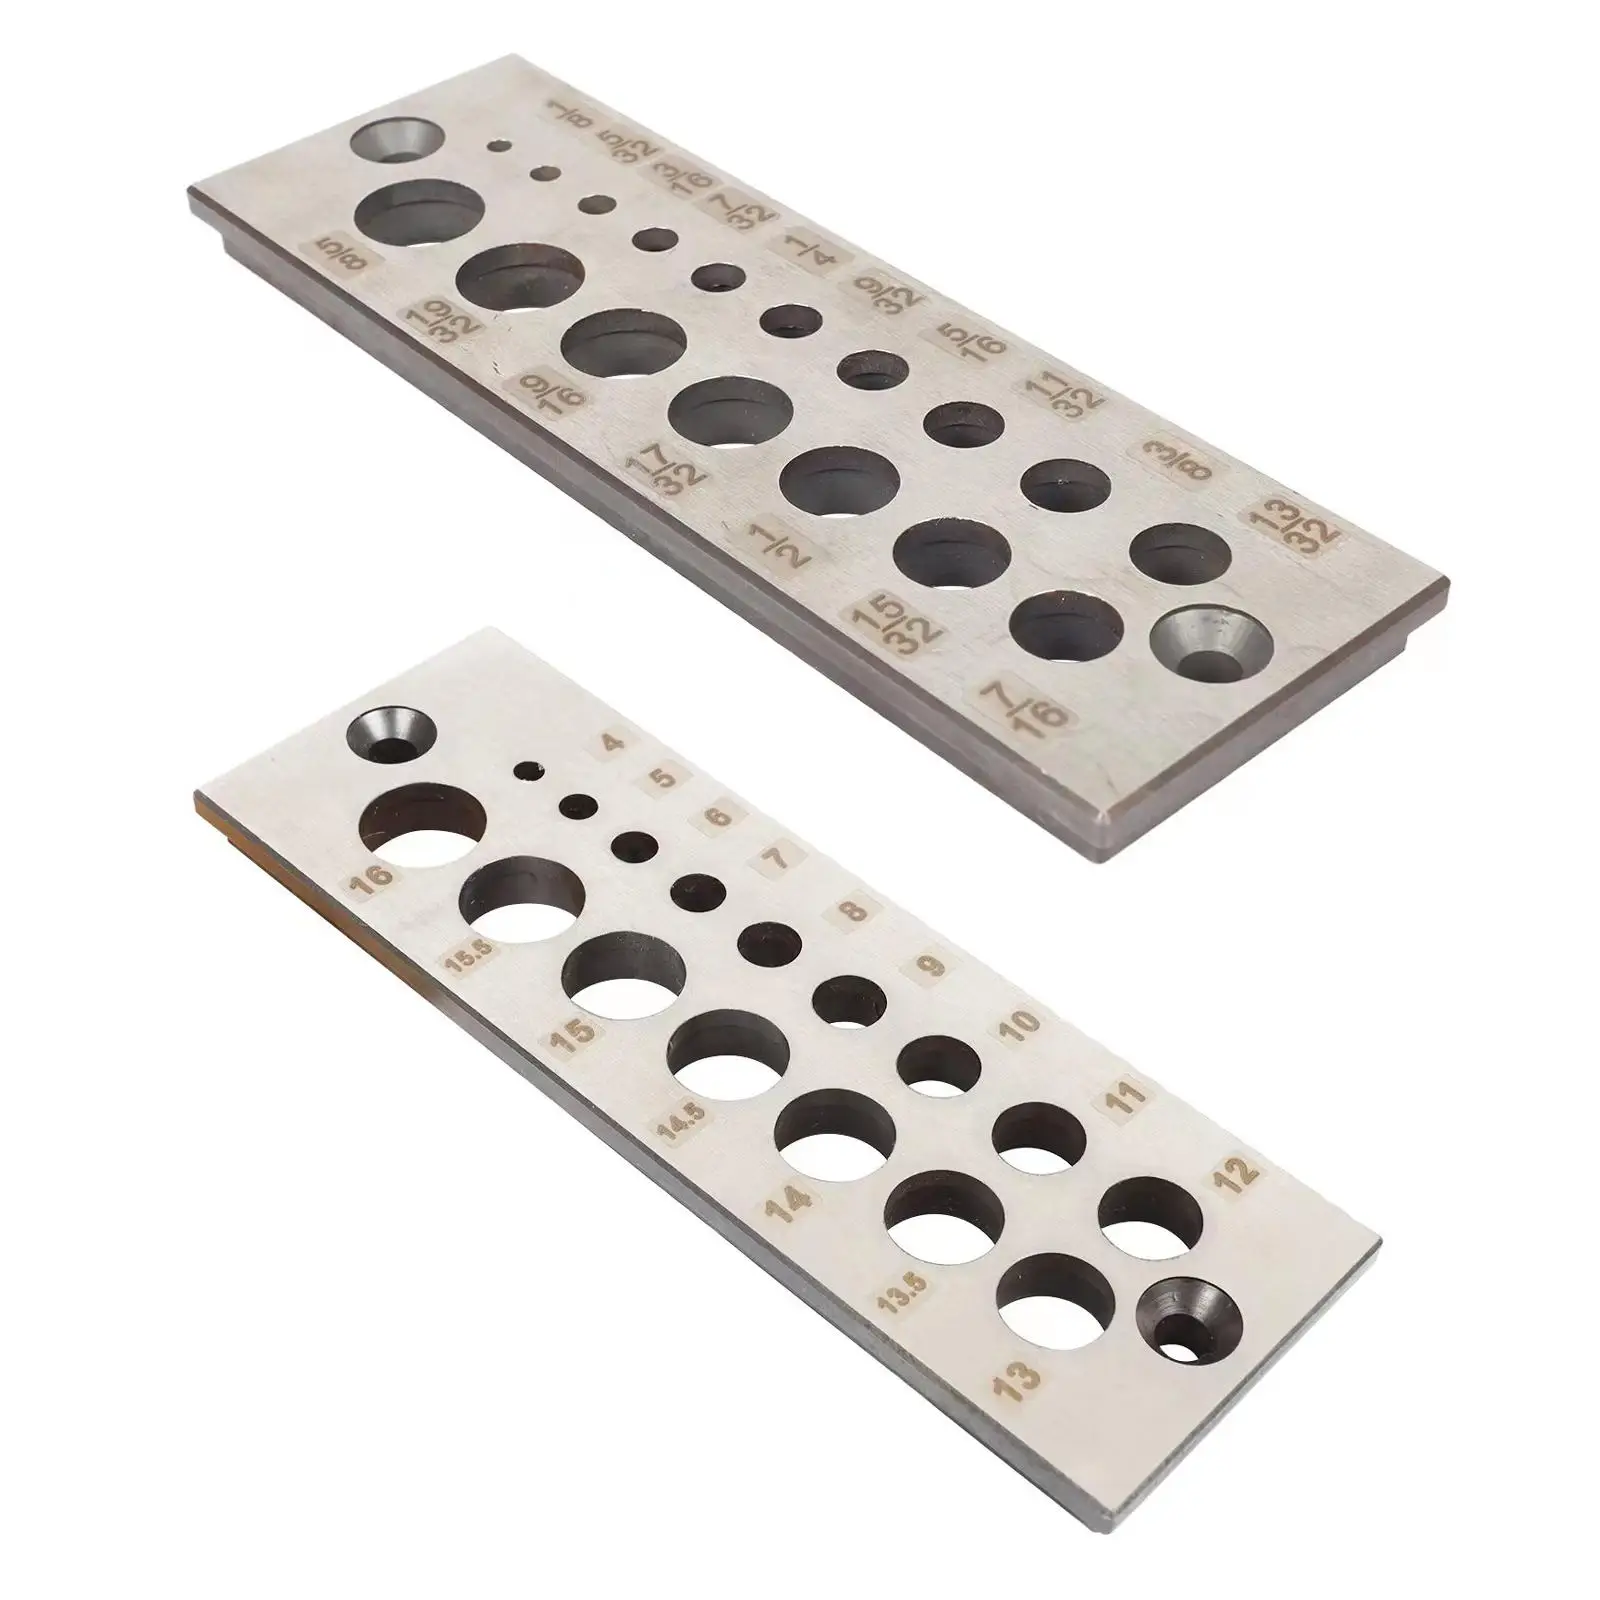 17 Holes Dowel Maker with Scores Practical Fasteners for Industrial Woodworking